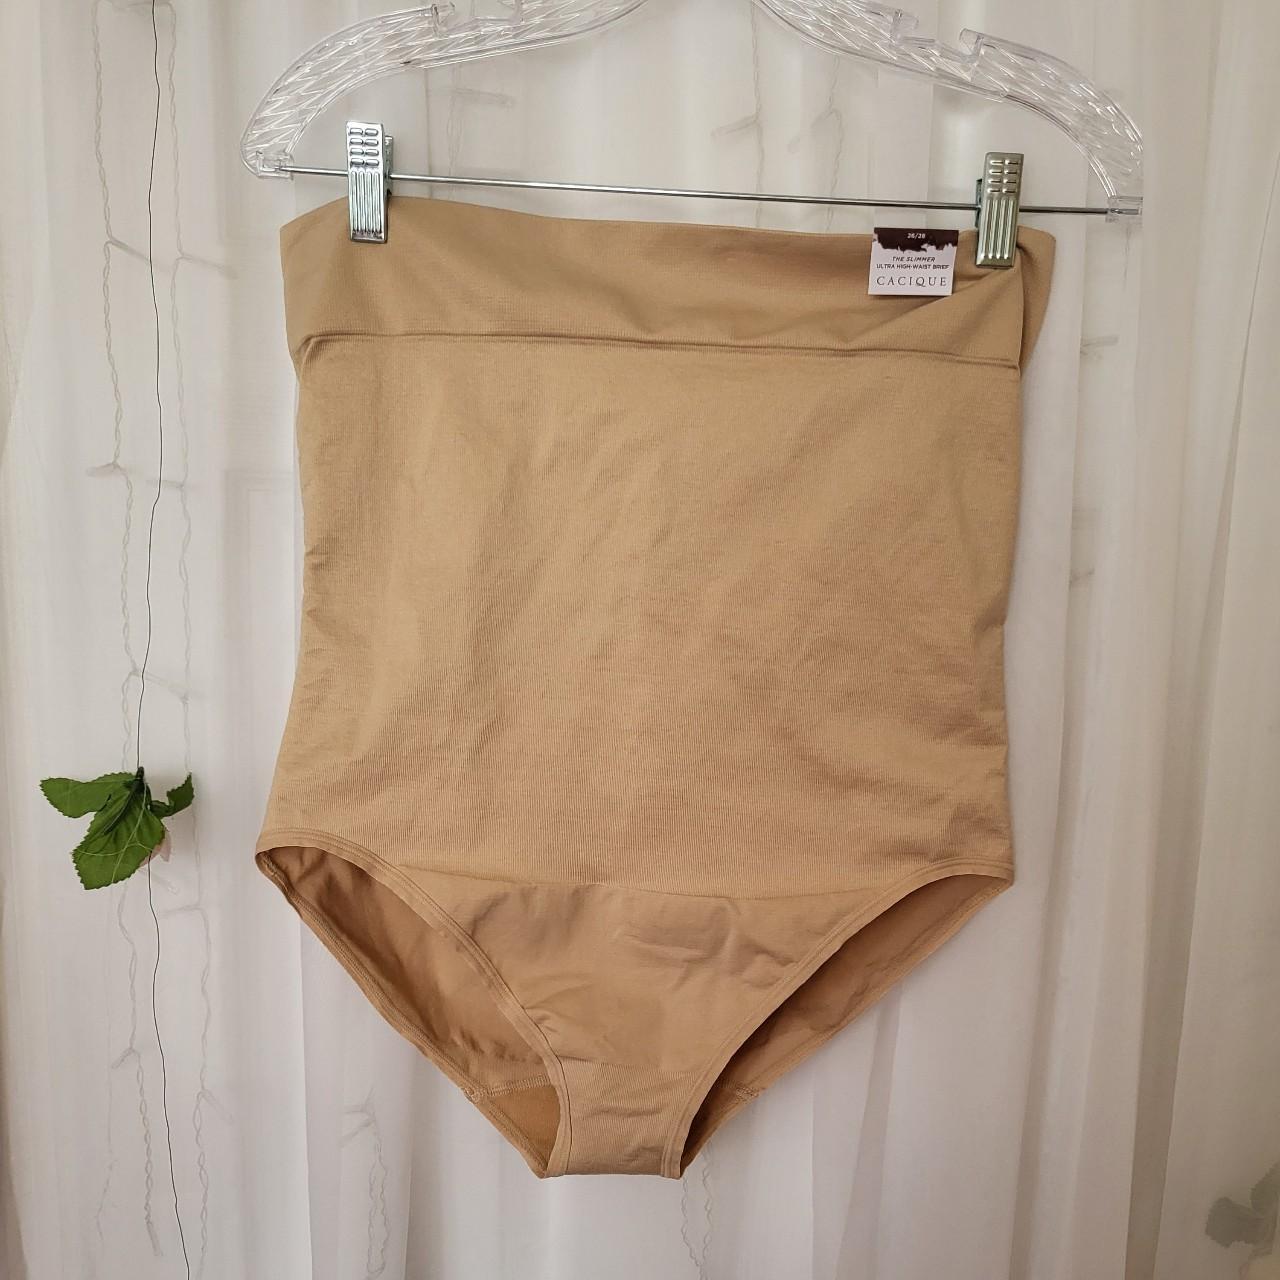 Cacique The Slimmer High Waist Brief *new without - Depop